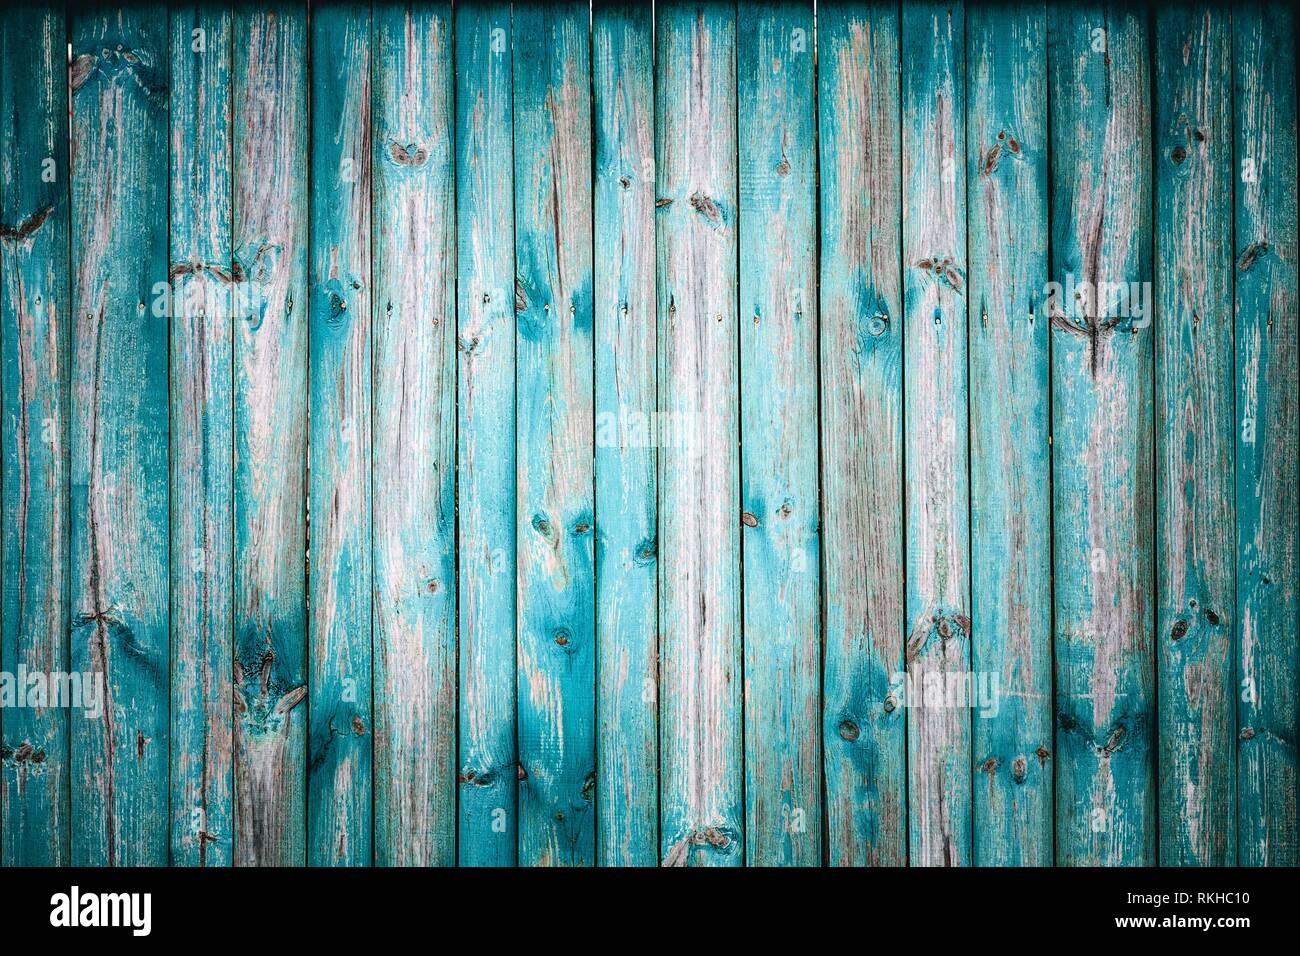 Blue Grunge Wooden Texture With Natural Patterns. Background Surface Old Wood Paint Over. Stock Photo